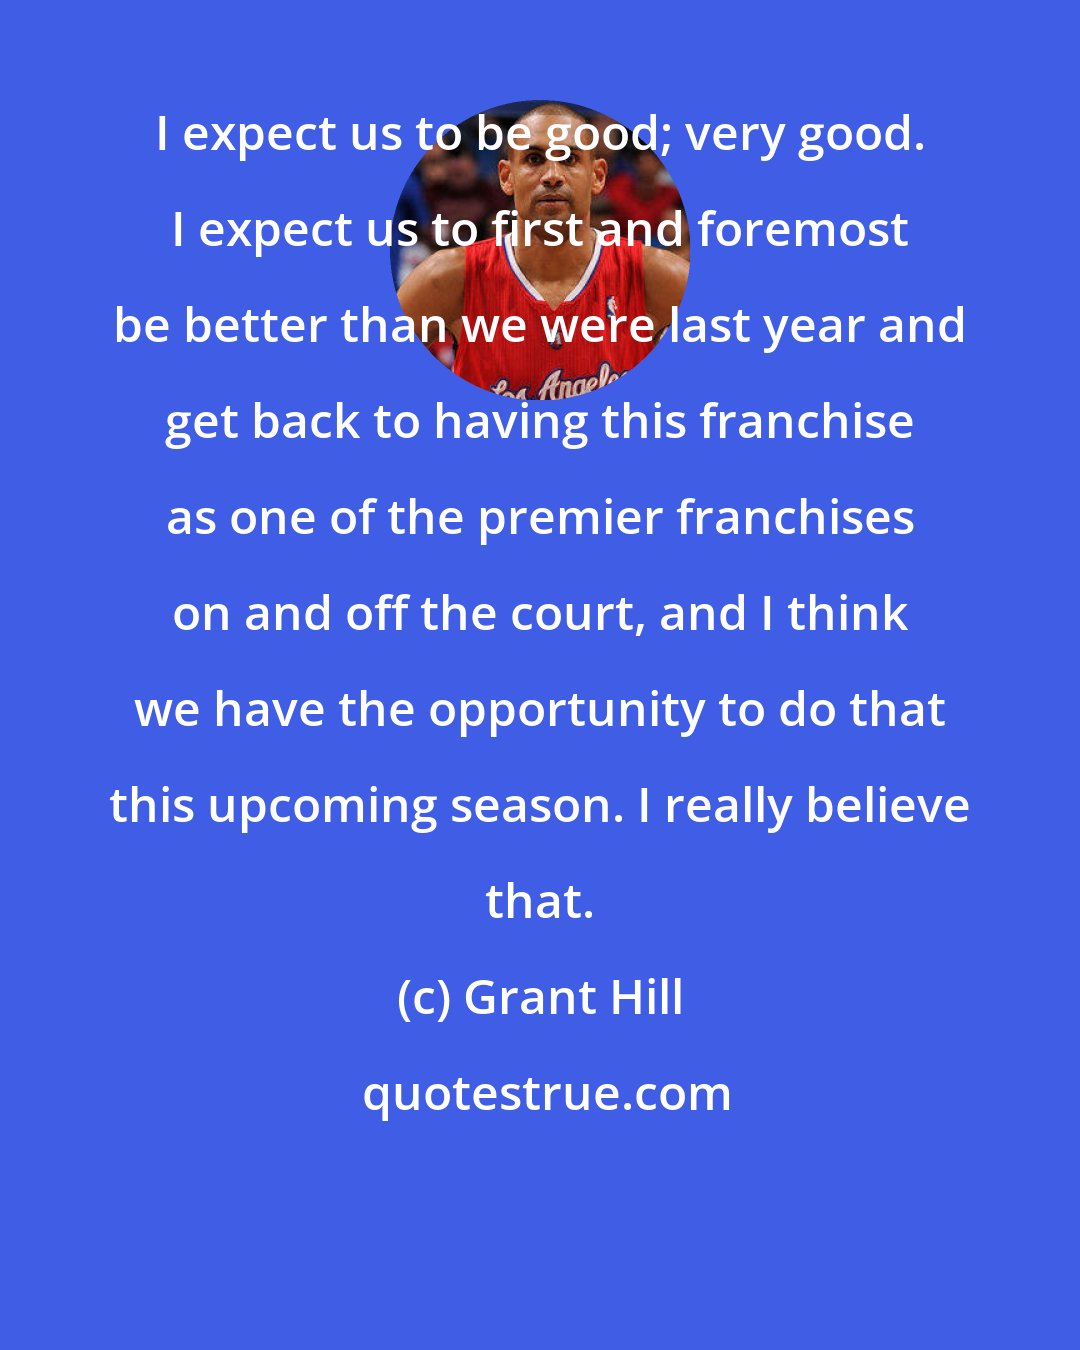 Grant Hill: I expect us to be good; very good. I expect us to first and foremost be better than we were last year and get back to having this franchise as one of the premier franchises on and off the court, and I think we have the opportunity to do that this upcoming season. I really believe that.